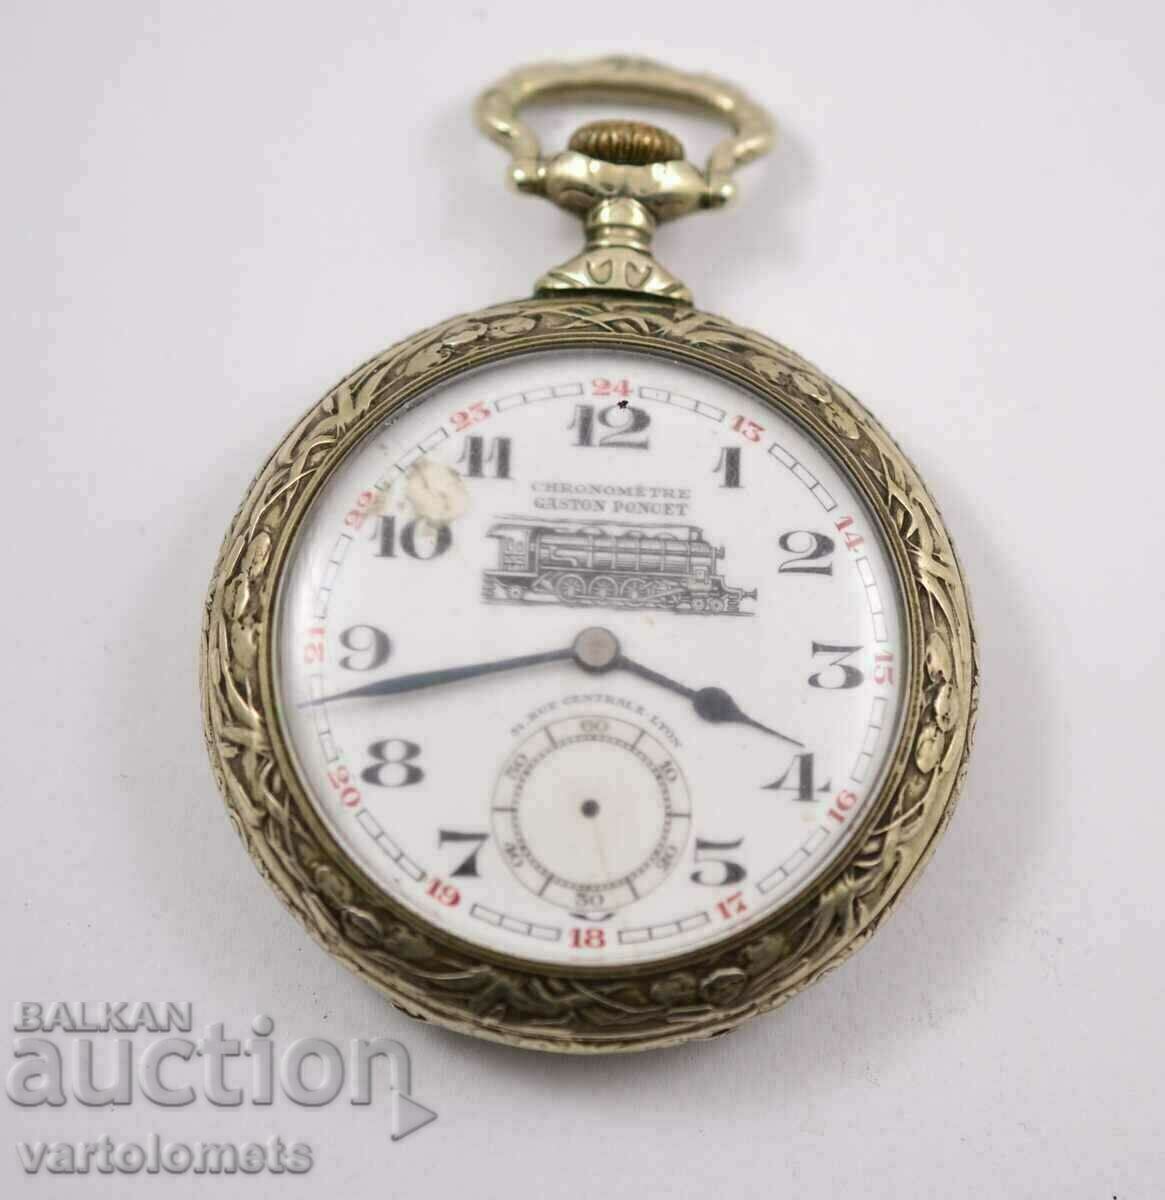 Gaston Poncet Extra Large Pocket Watch - Not Working